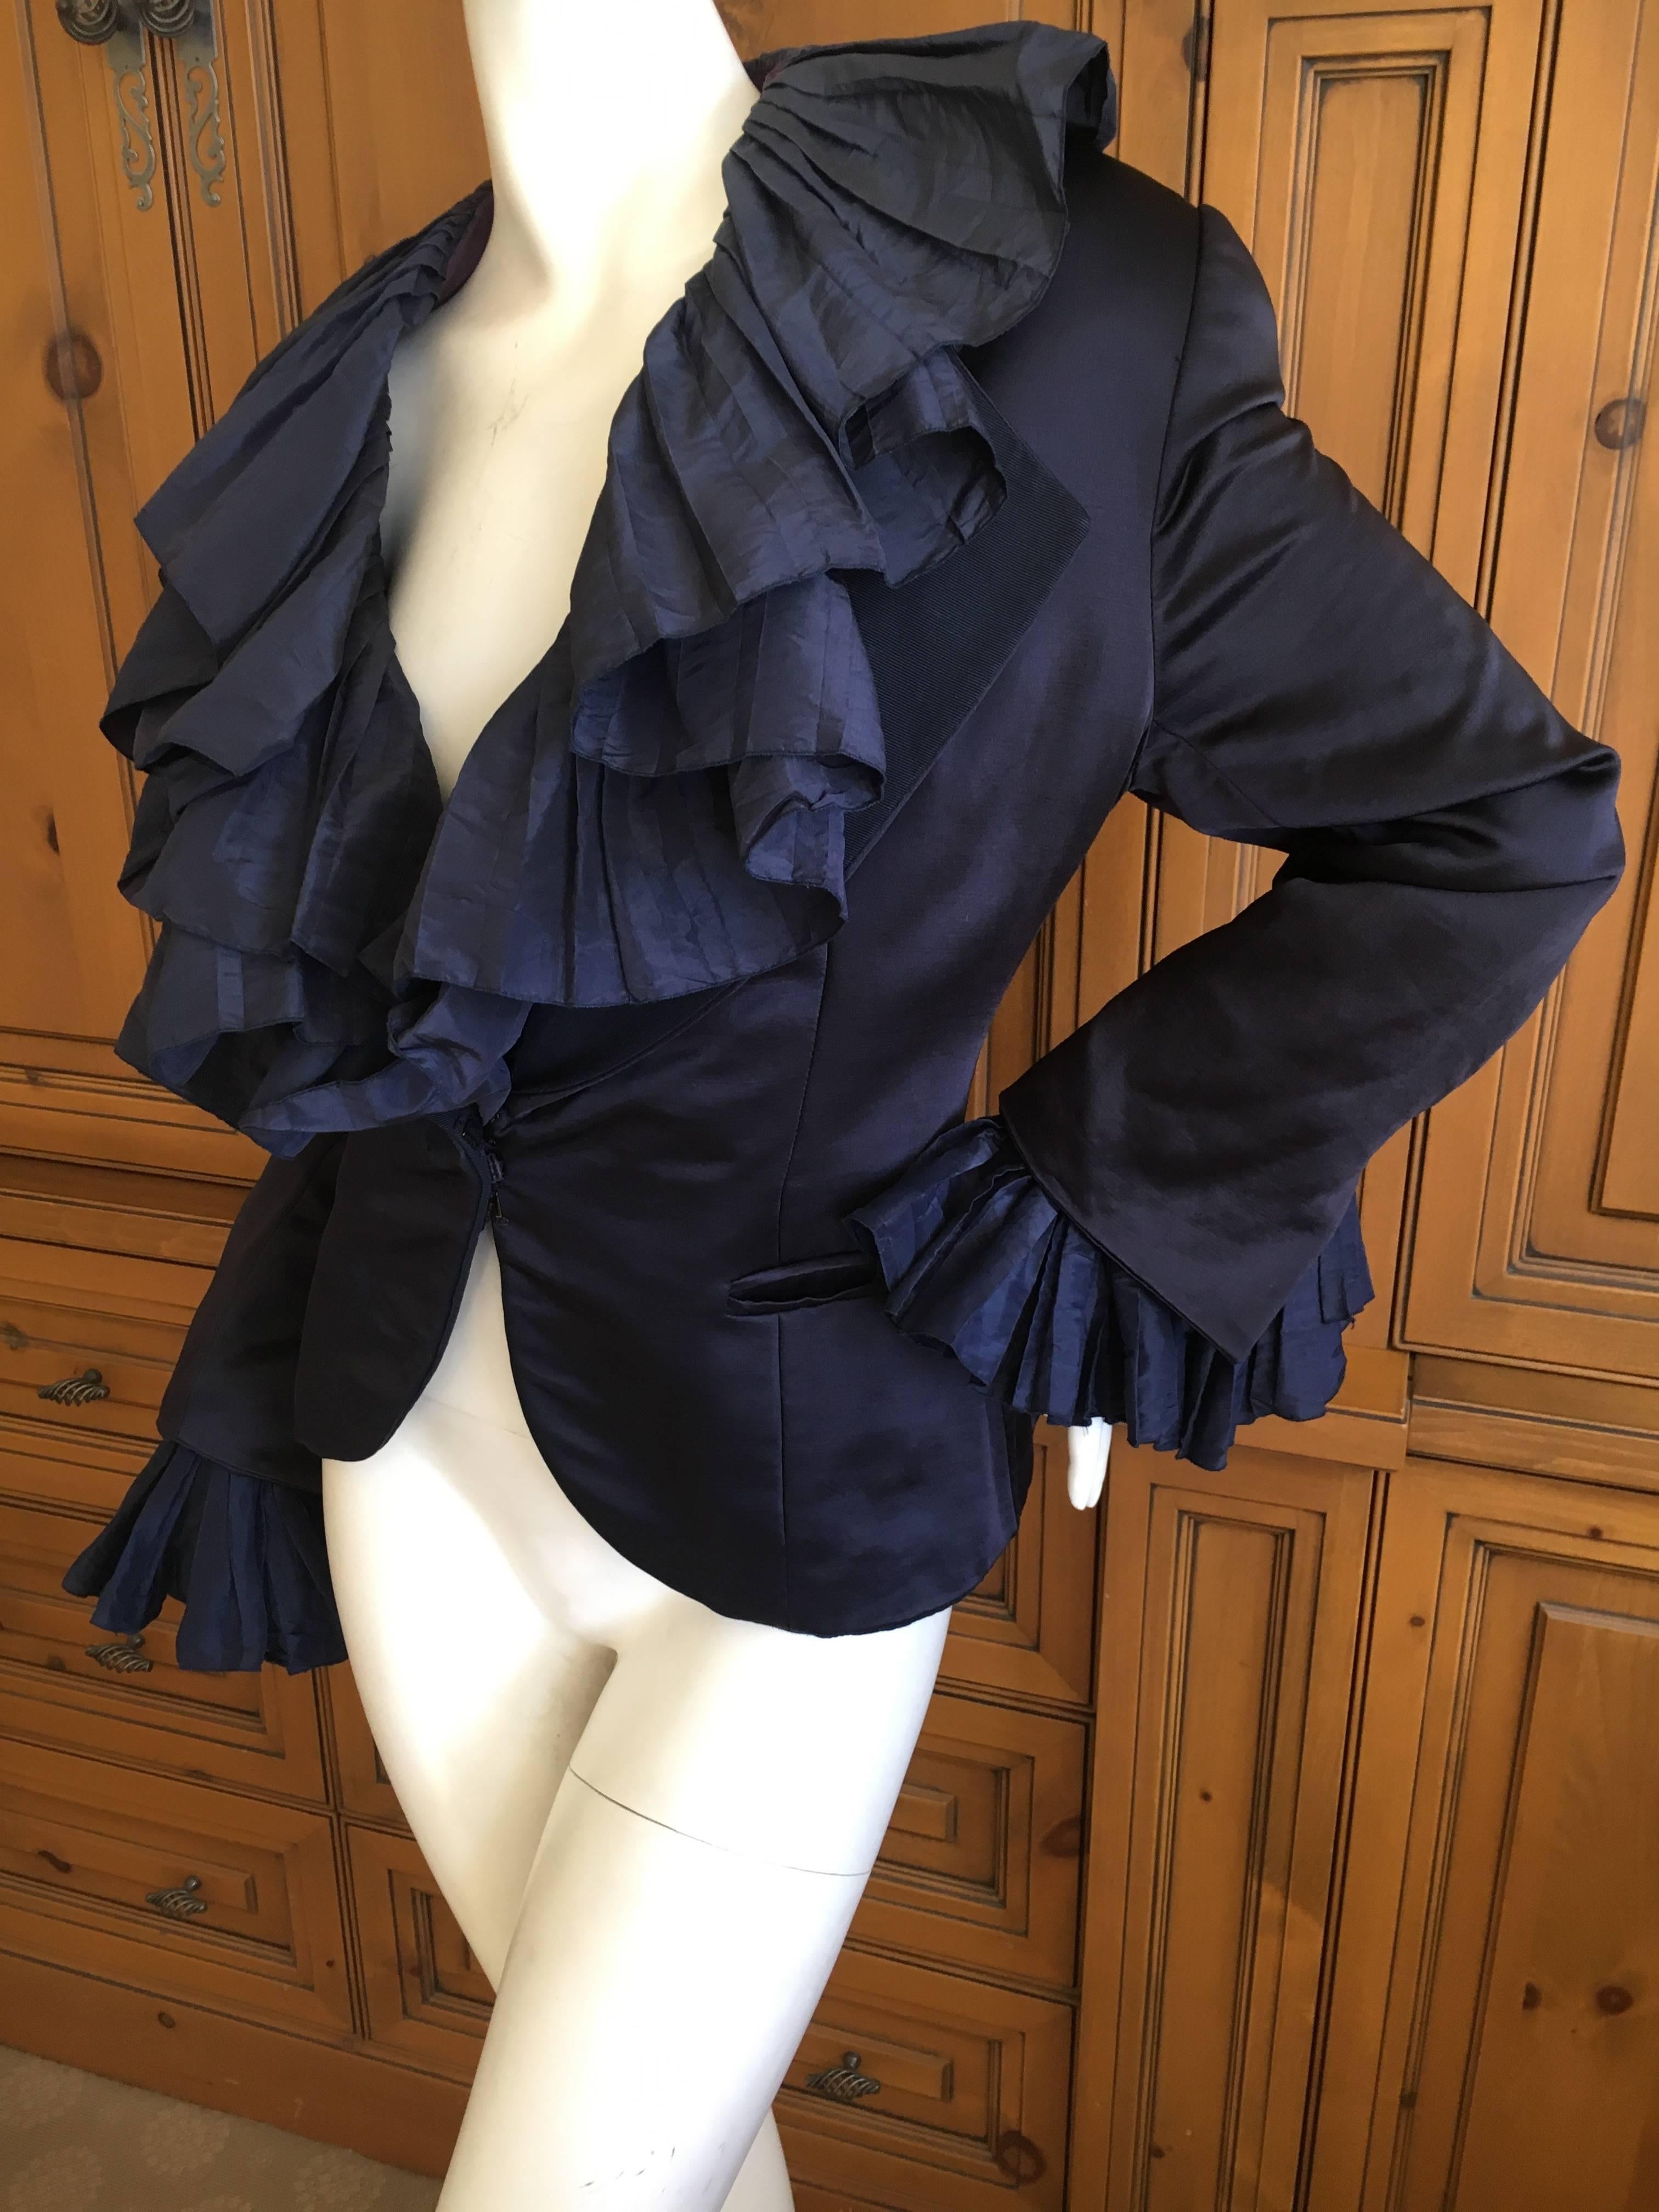 Black Christian Dior Numbered Demi Couture Ruffled Silk Jacket by Gianfranco Ferre XL For Sale